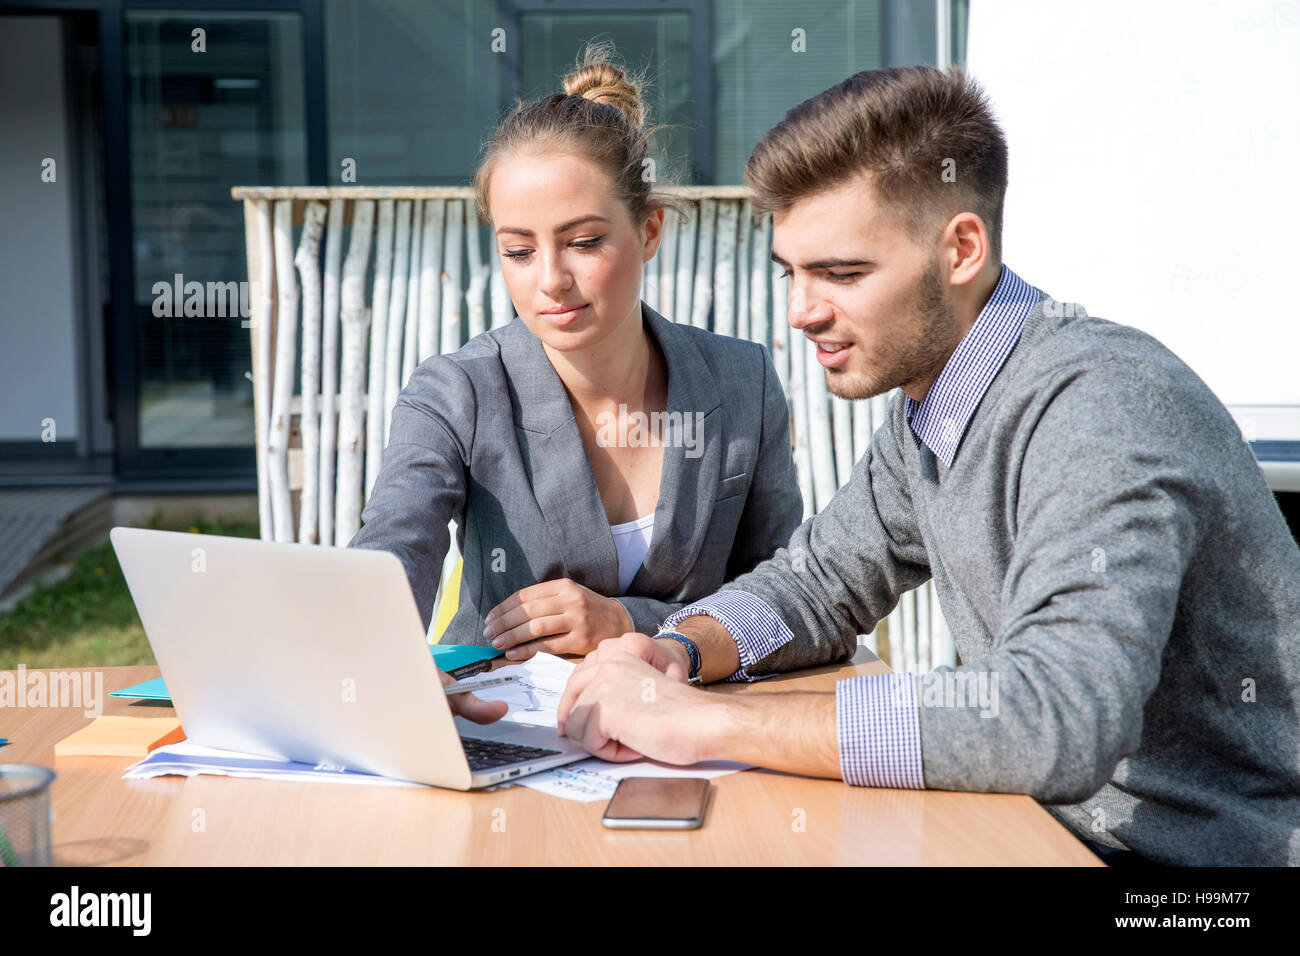 Two business people working on laptop together Stock Photo